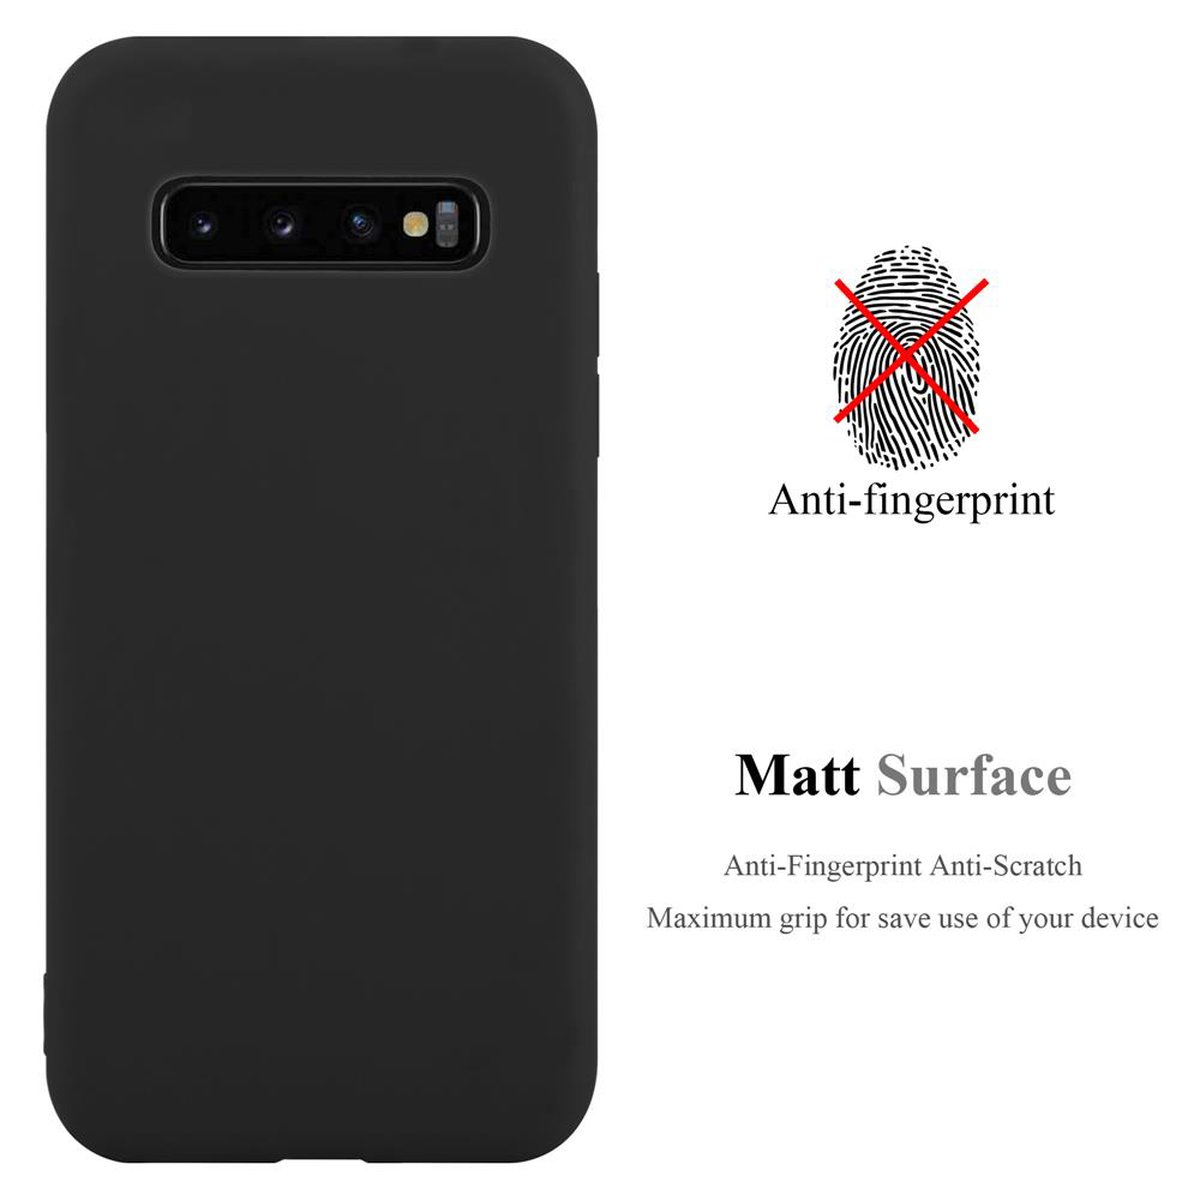 CANDY Backcover, Style, Samsung, S10 SCHWARZ PLUS, TPU CADORABO Candy Hülle im Galaxy